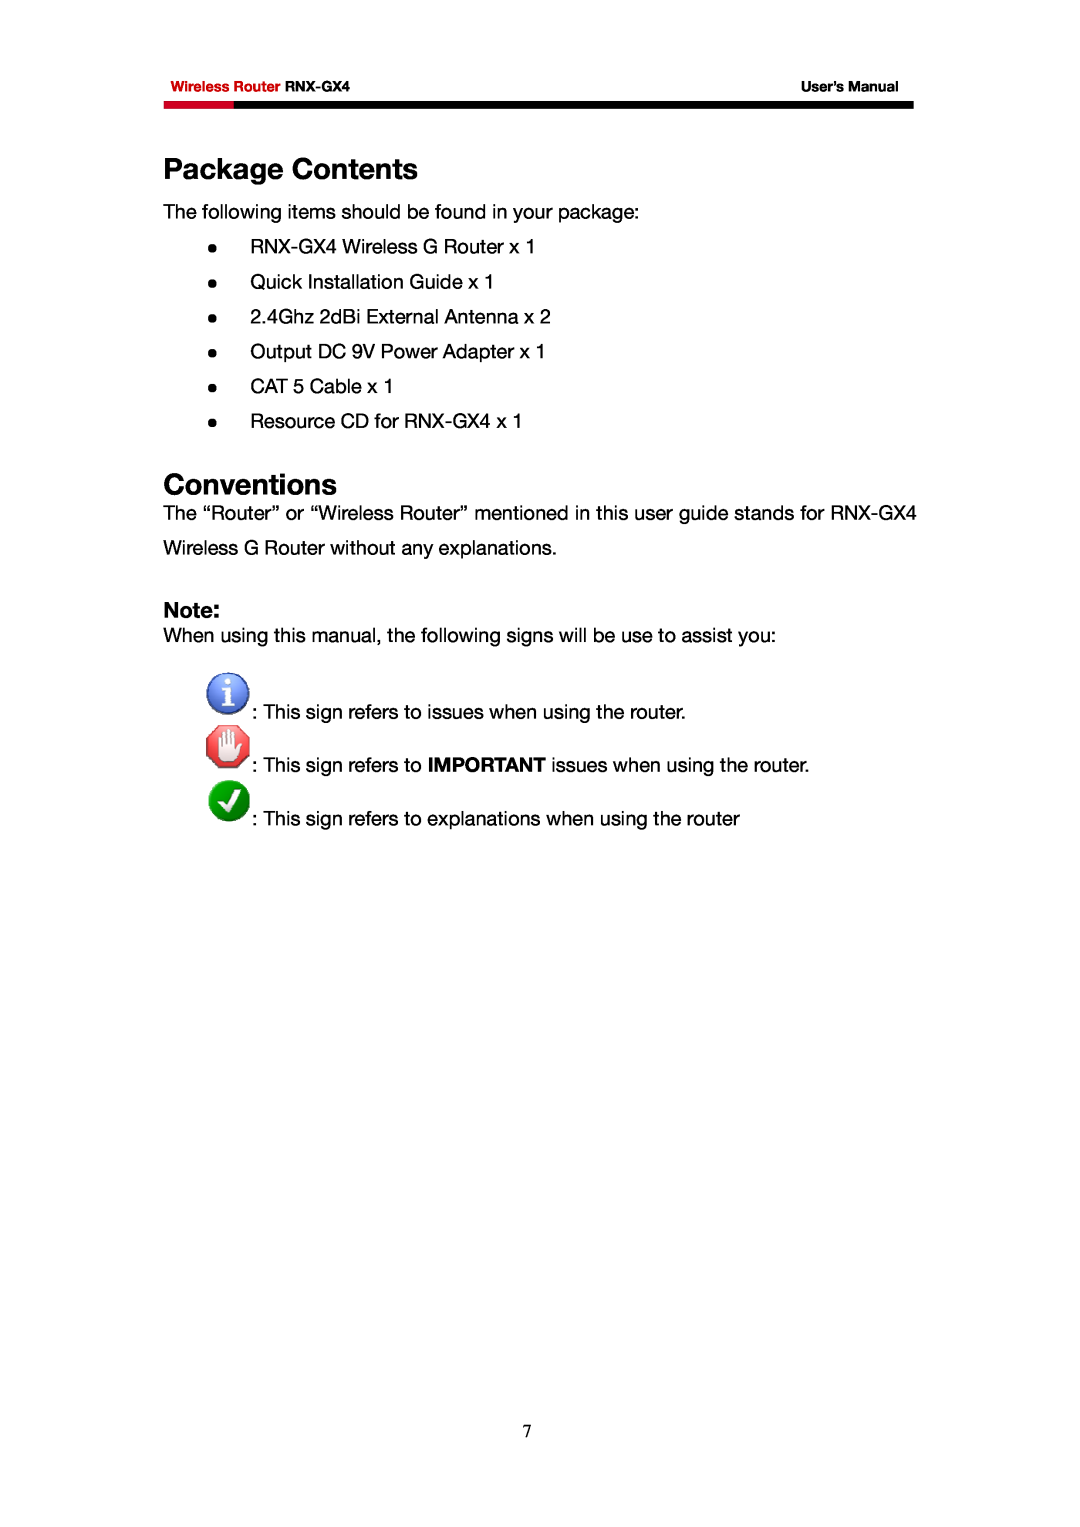 Rosewill RNX-GX4 user manual Package Contents, Conventions 